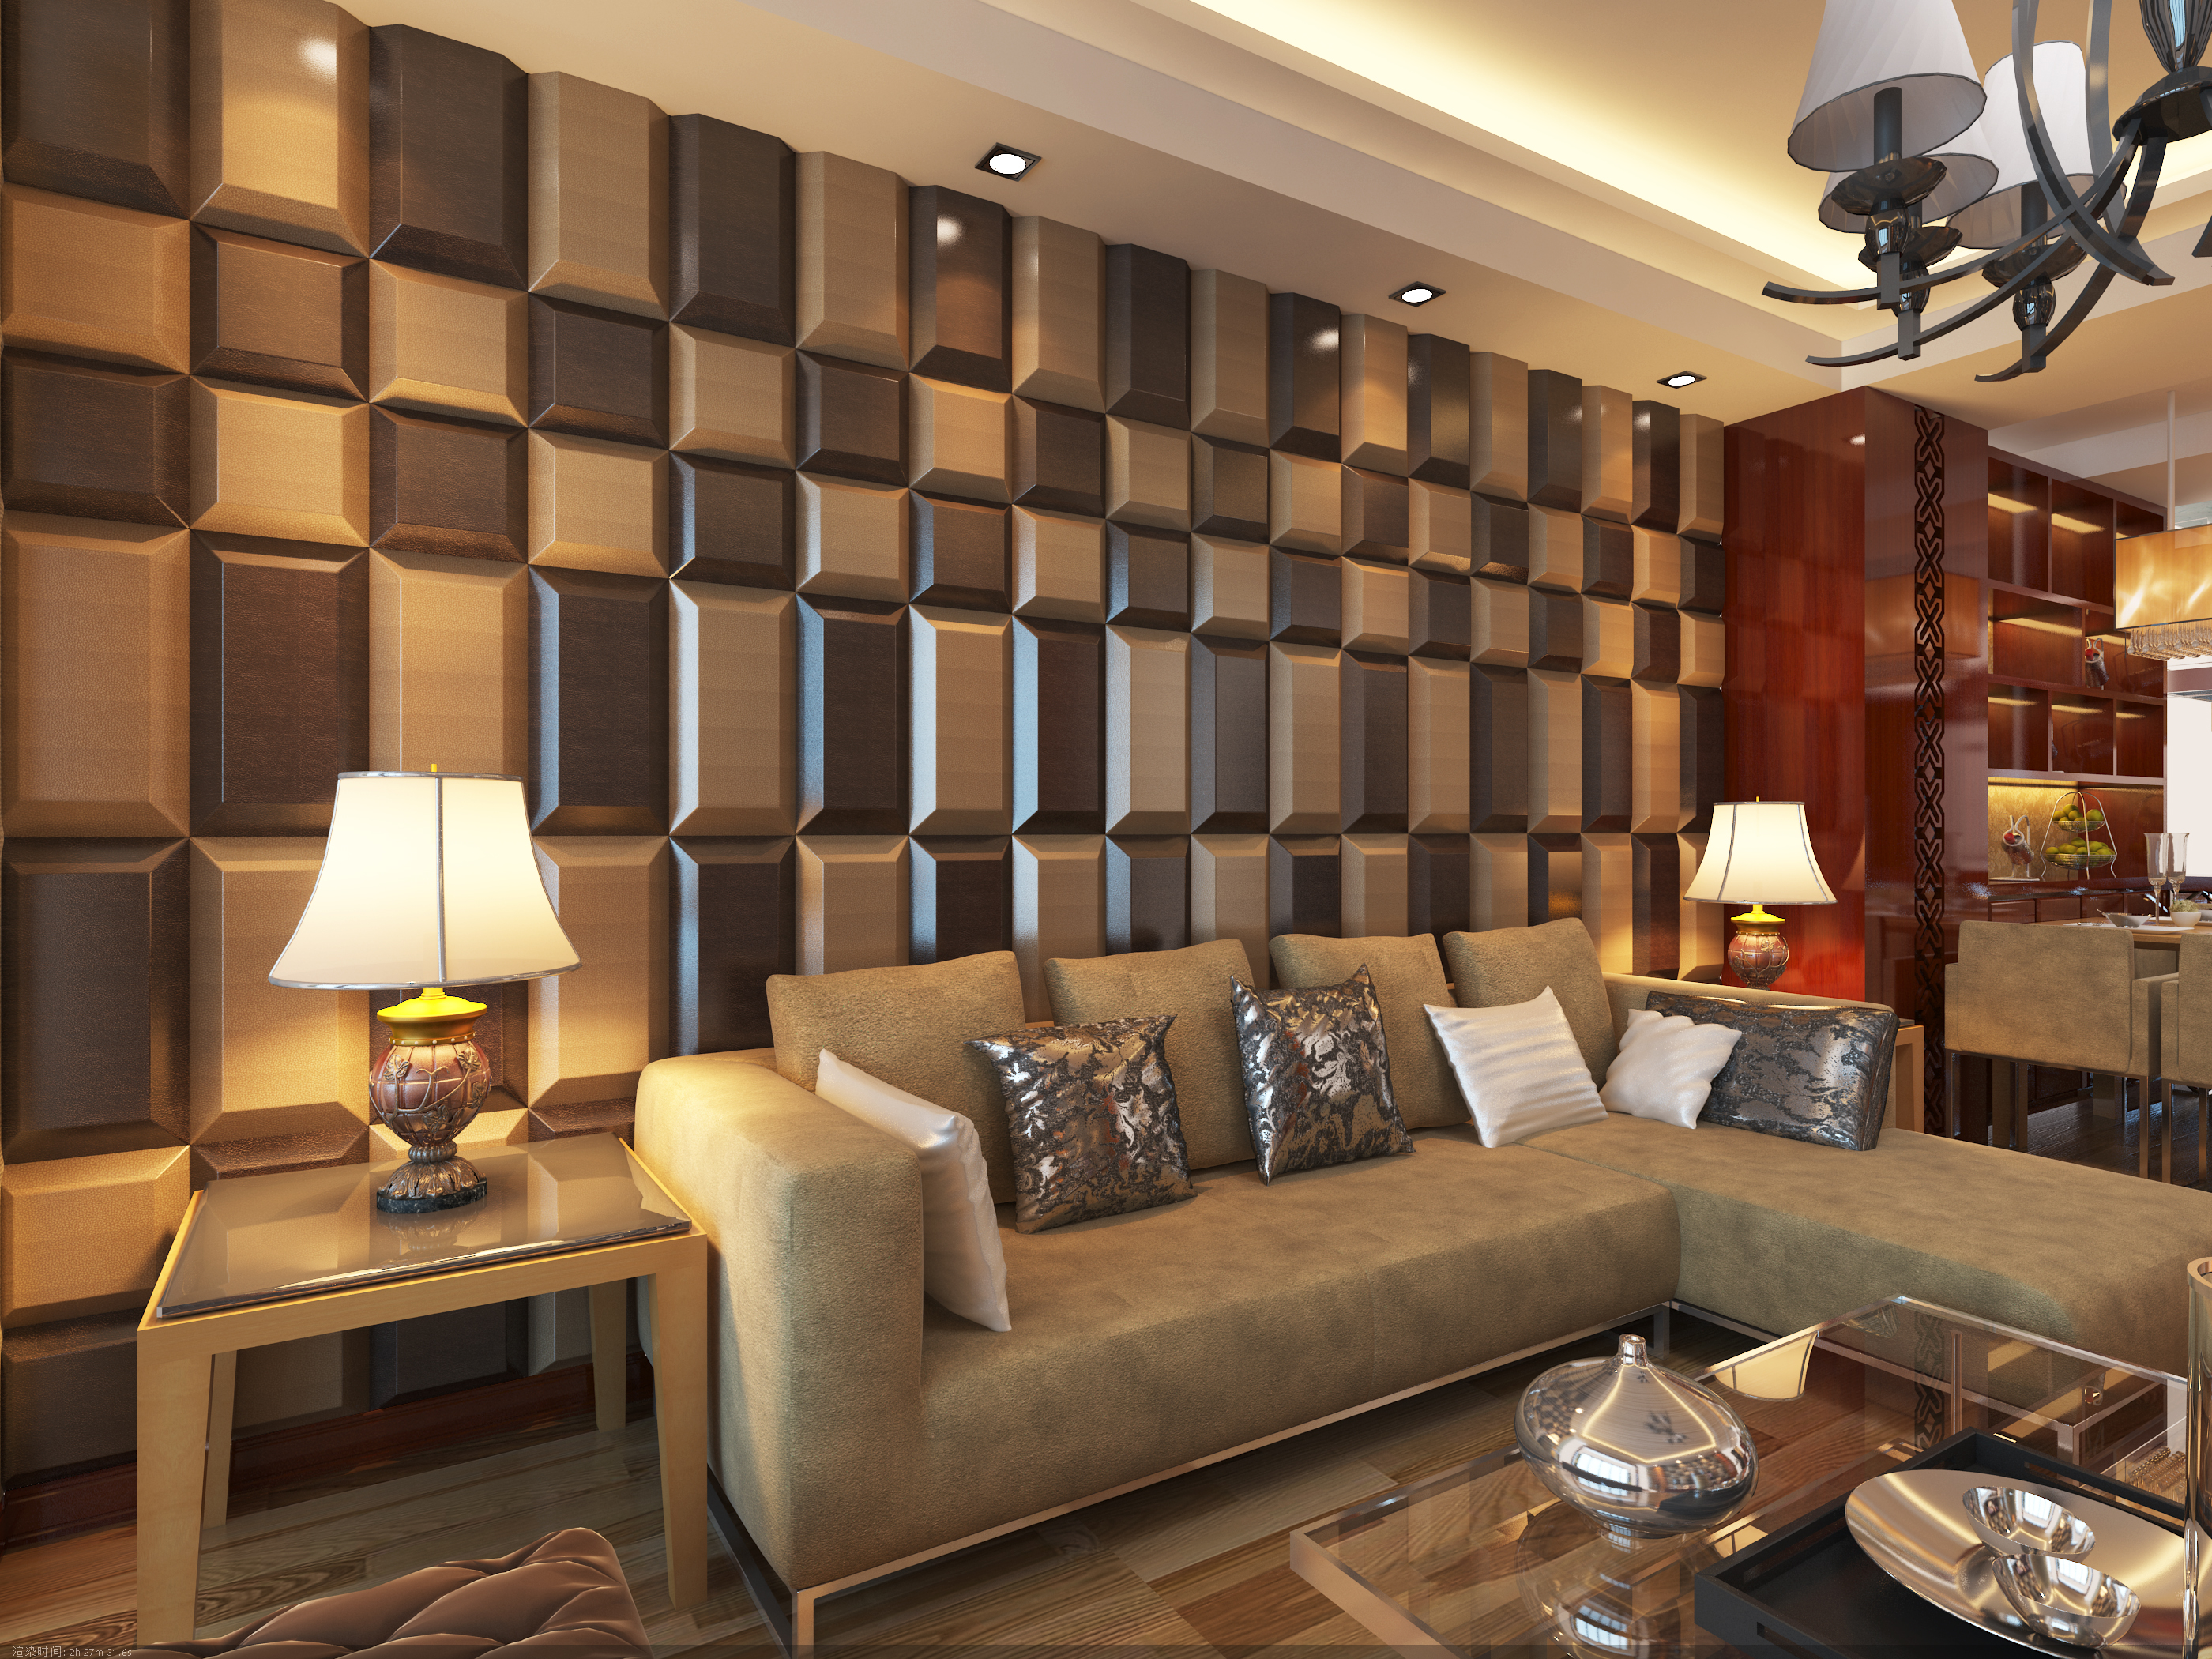 3D Leather Tiles in Living Room Wall Design